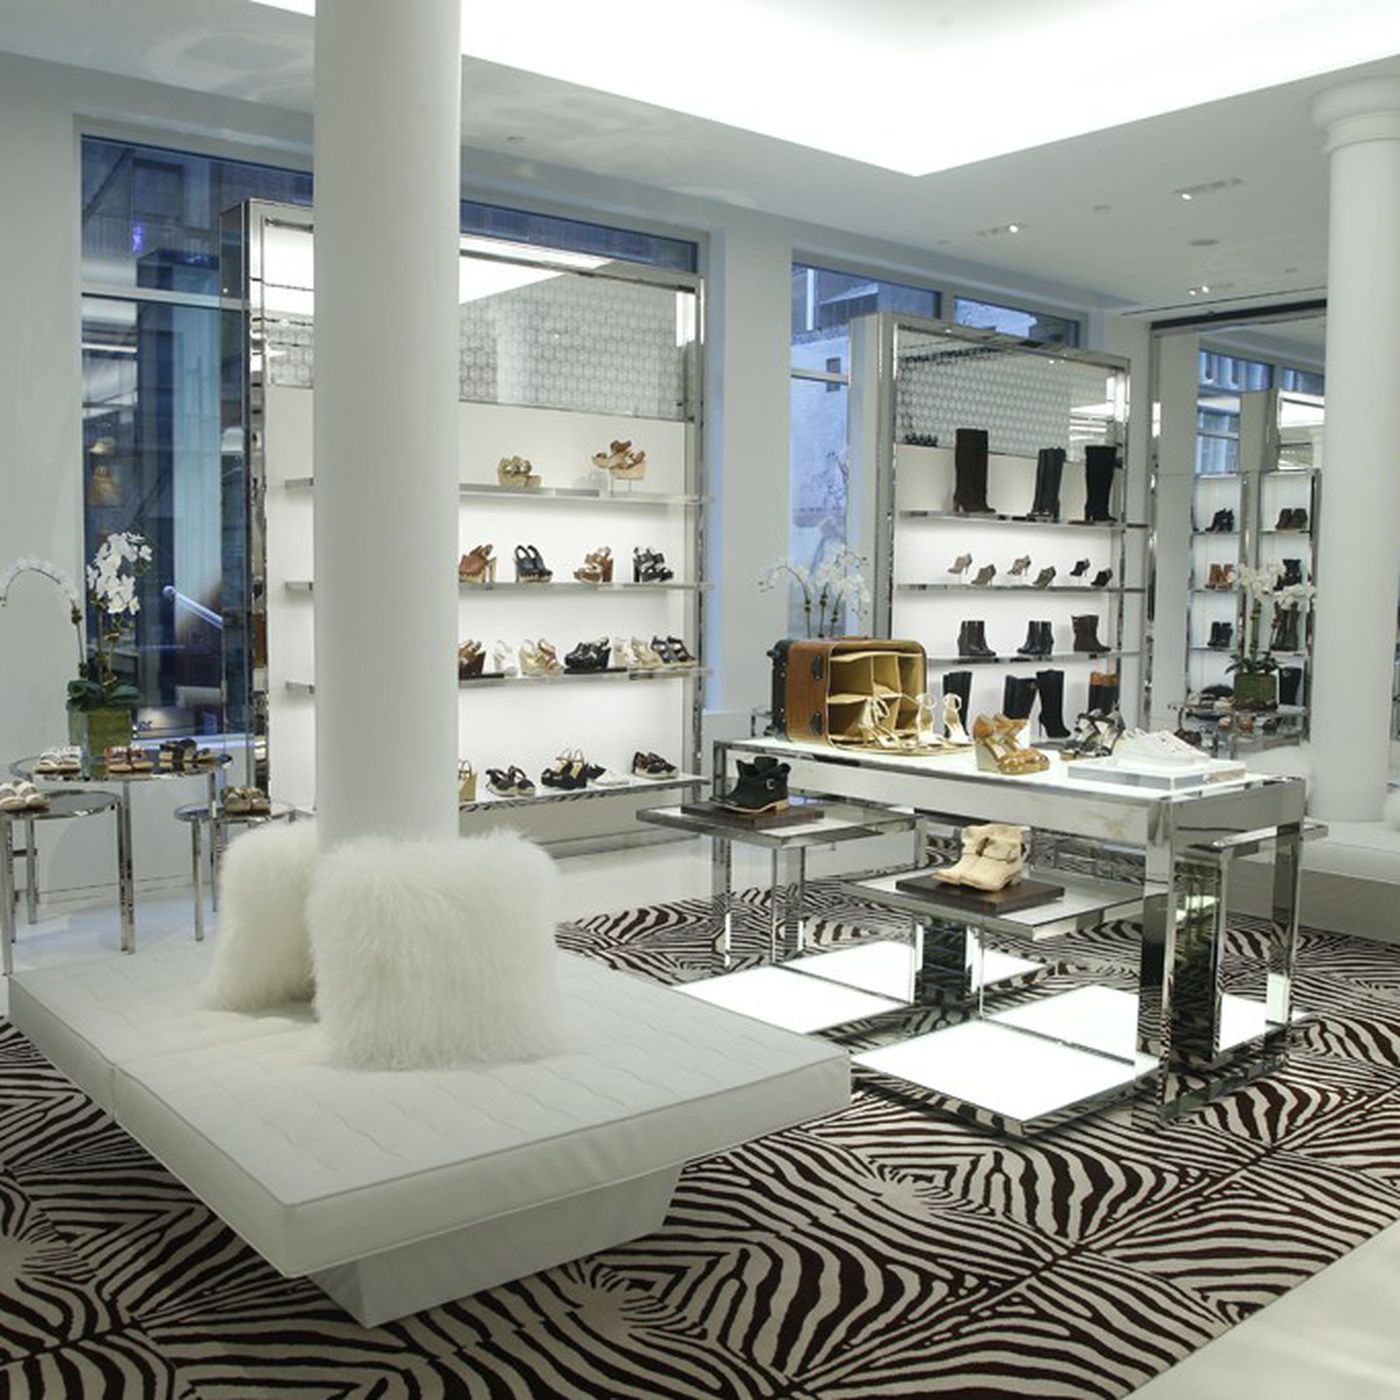 her Læsbarhed overfladisk Michael Kors' Broadway Store Includes the Menswear Floor New York City  Deserves - Racked NY